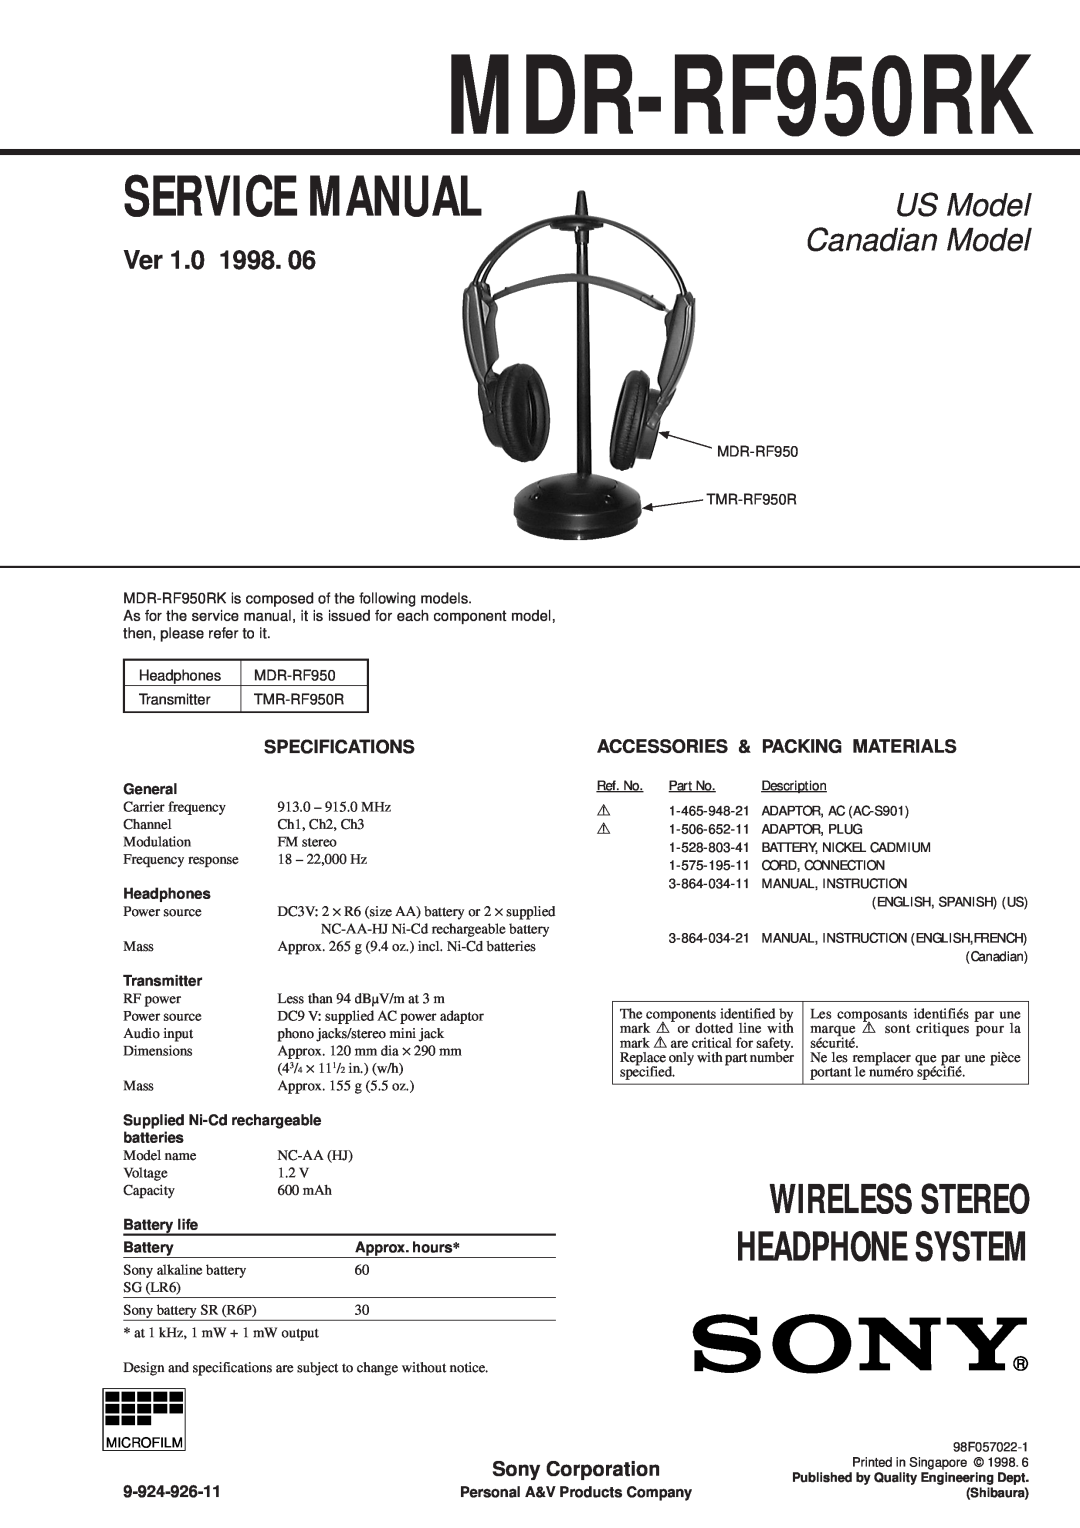 Sony MDR-RF950RK service manual Headphone System, US Model, Wireless Stereo, Canadian Model, Ver, Sony Corporation 